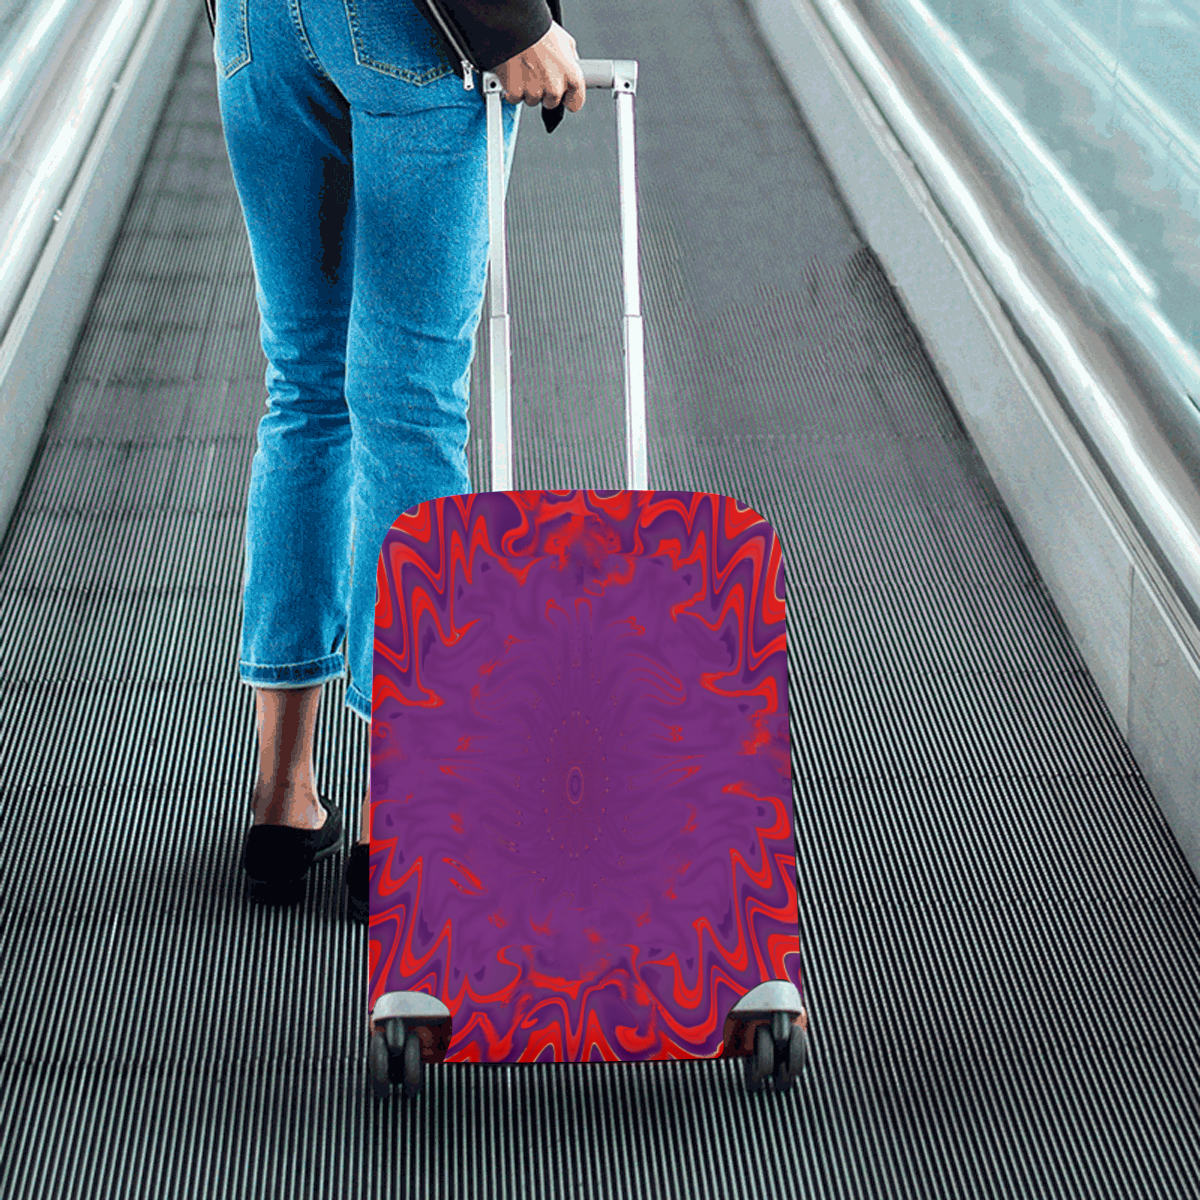 Blossom Luggage Cover/Small 18"-21"